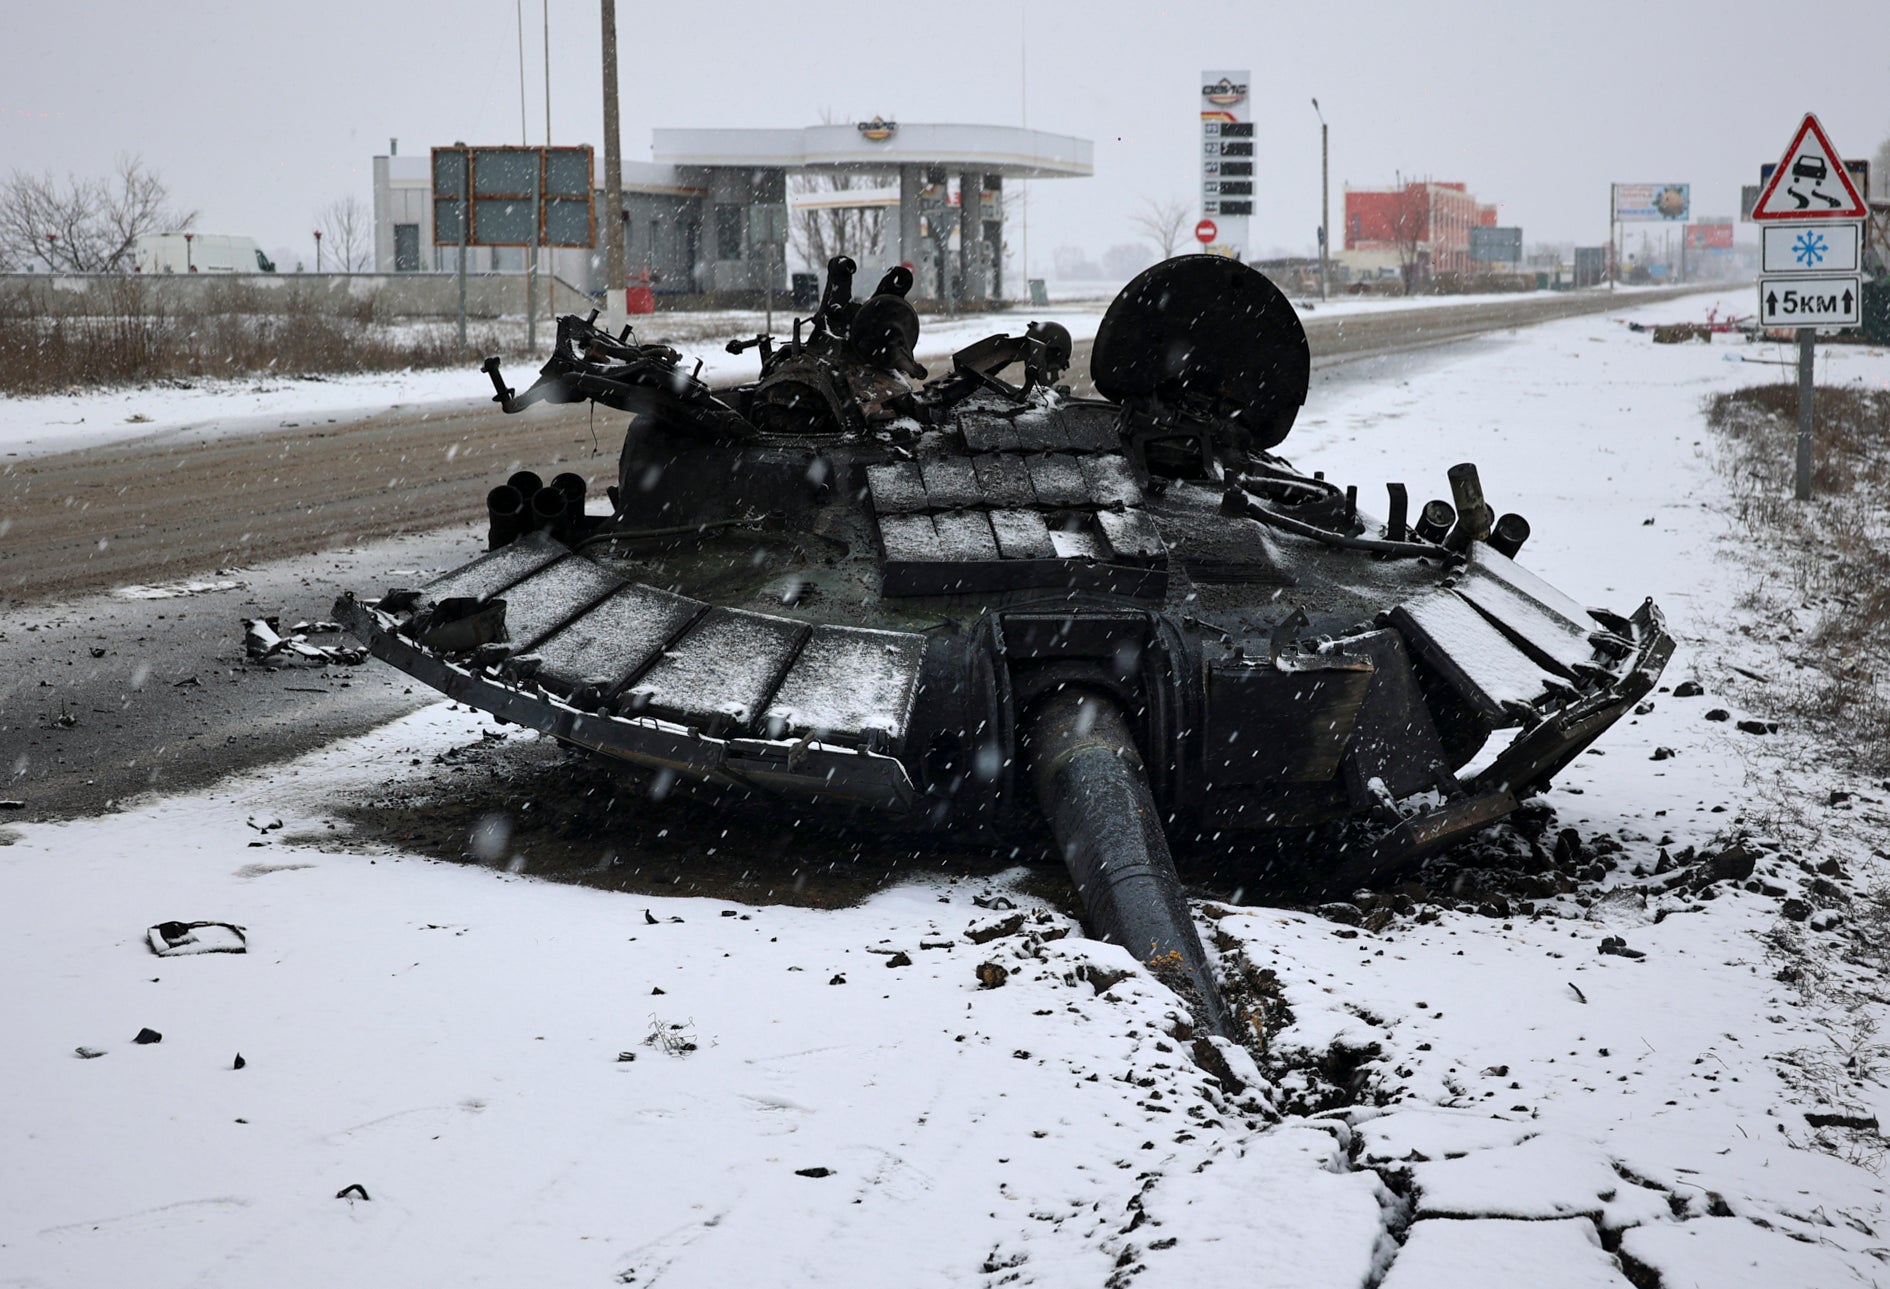 The burnt-out turret of a Russian tank is left abandoned after the Ukrainian army attacked it the previous day near the city of Kharkiv, Ukraine, 25 February 2022